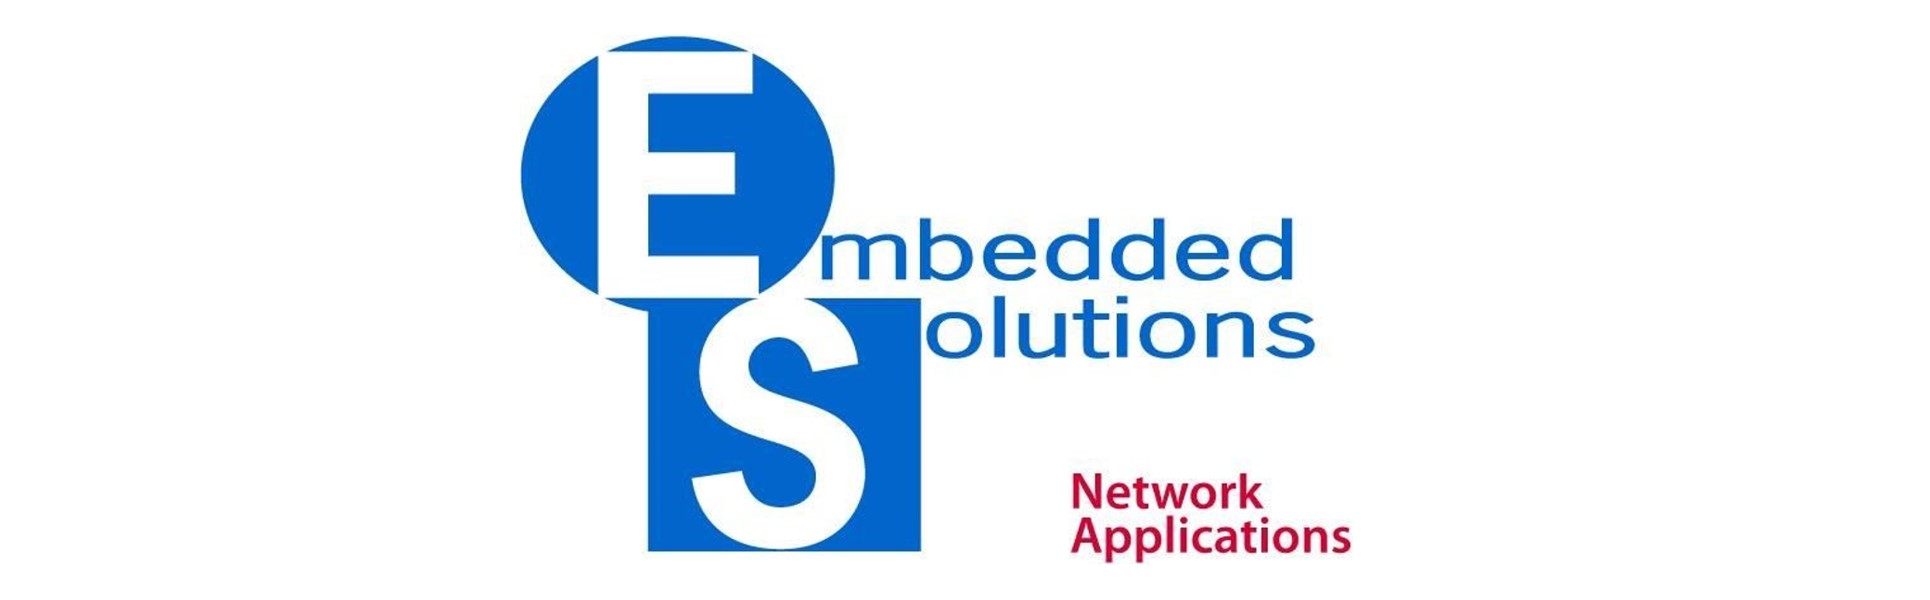 embedded-solutions